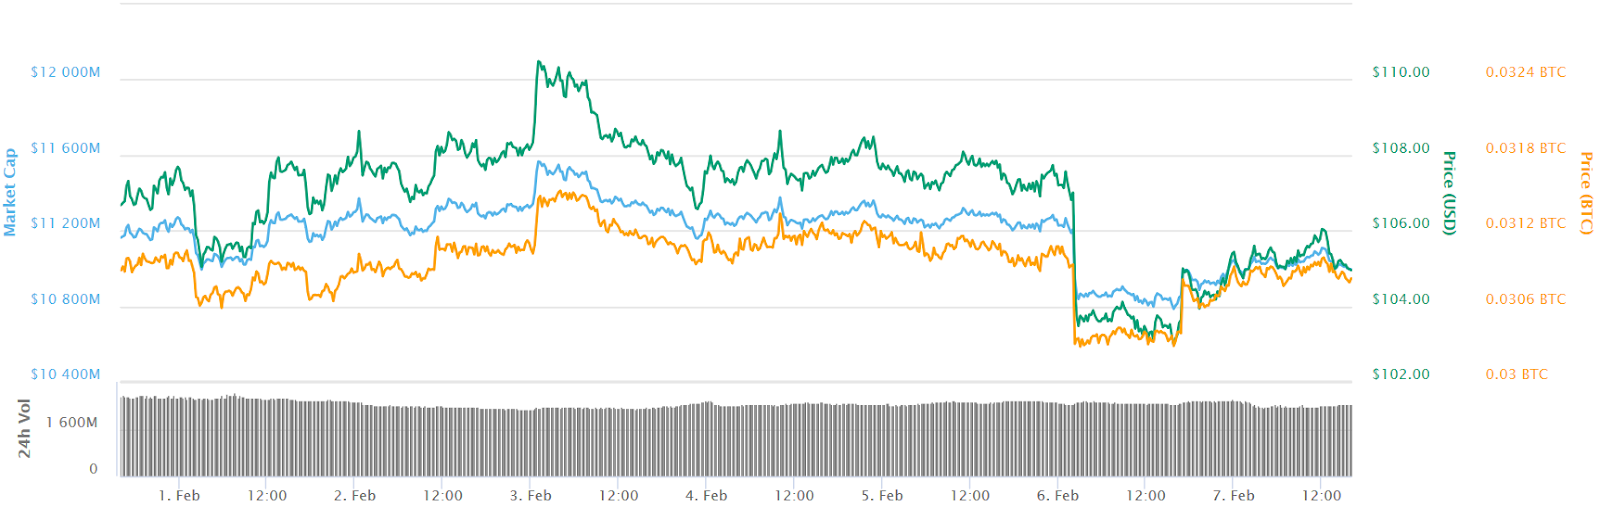 Ethereum 7-day price chart